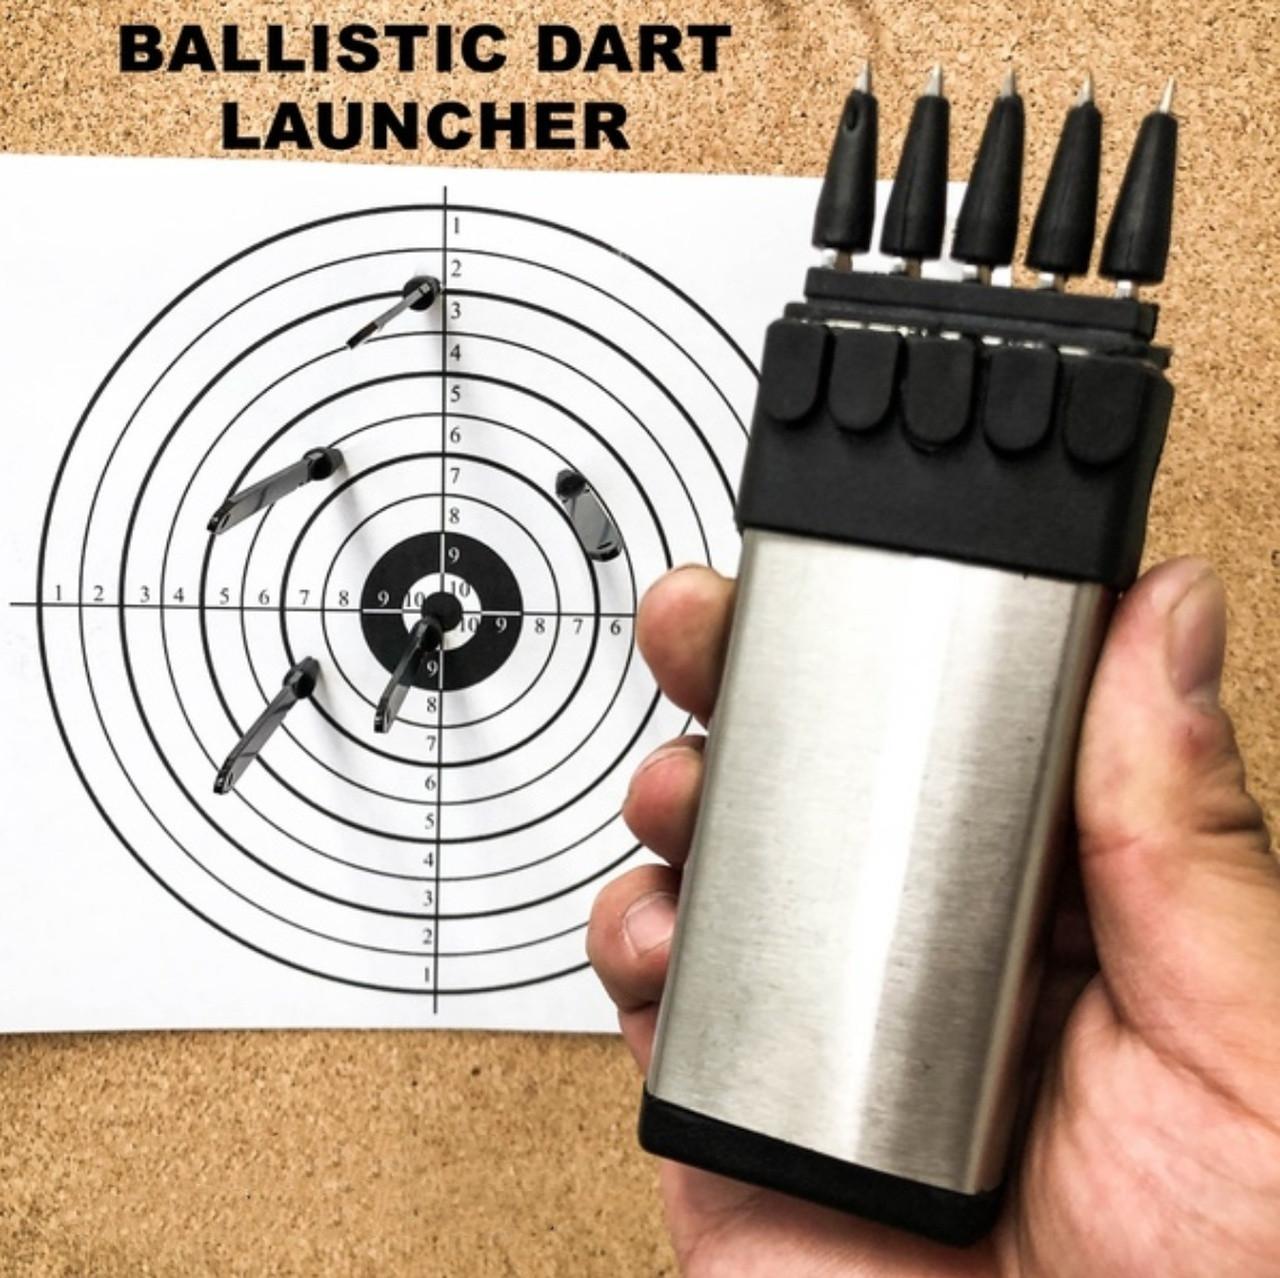 

Dart Shooting Ballistic Darts Launcher Knives, Outdoor camping Survival Self Defense hunting Tool Adult Gifts Toys